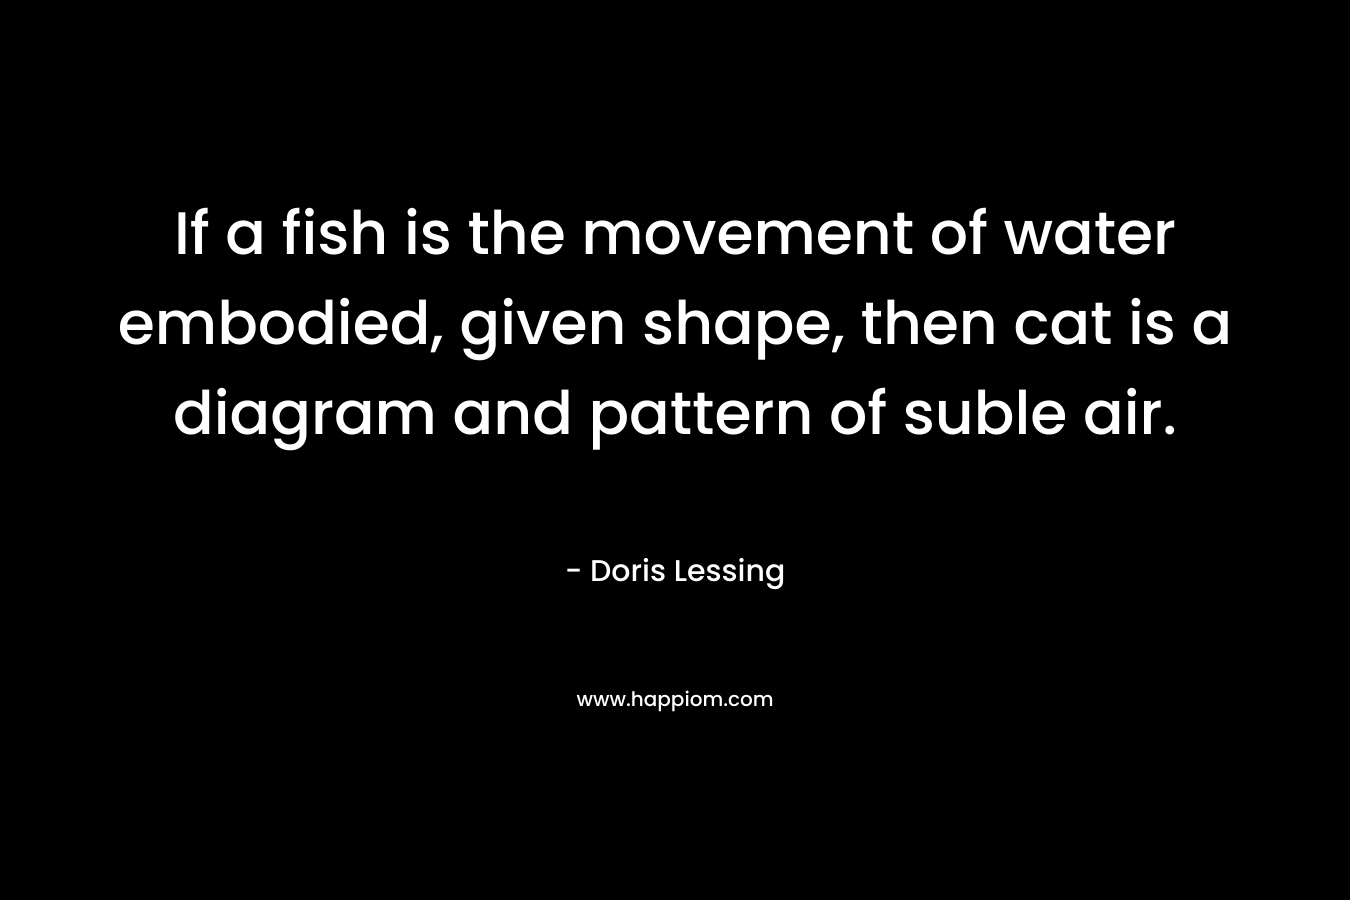 If a fish is the movement of water embodied, given shape, then cat is a diagram and pattern of suble air.